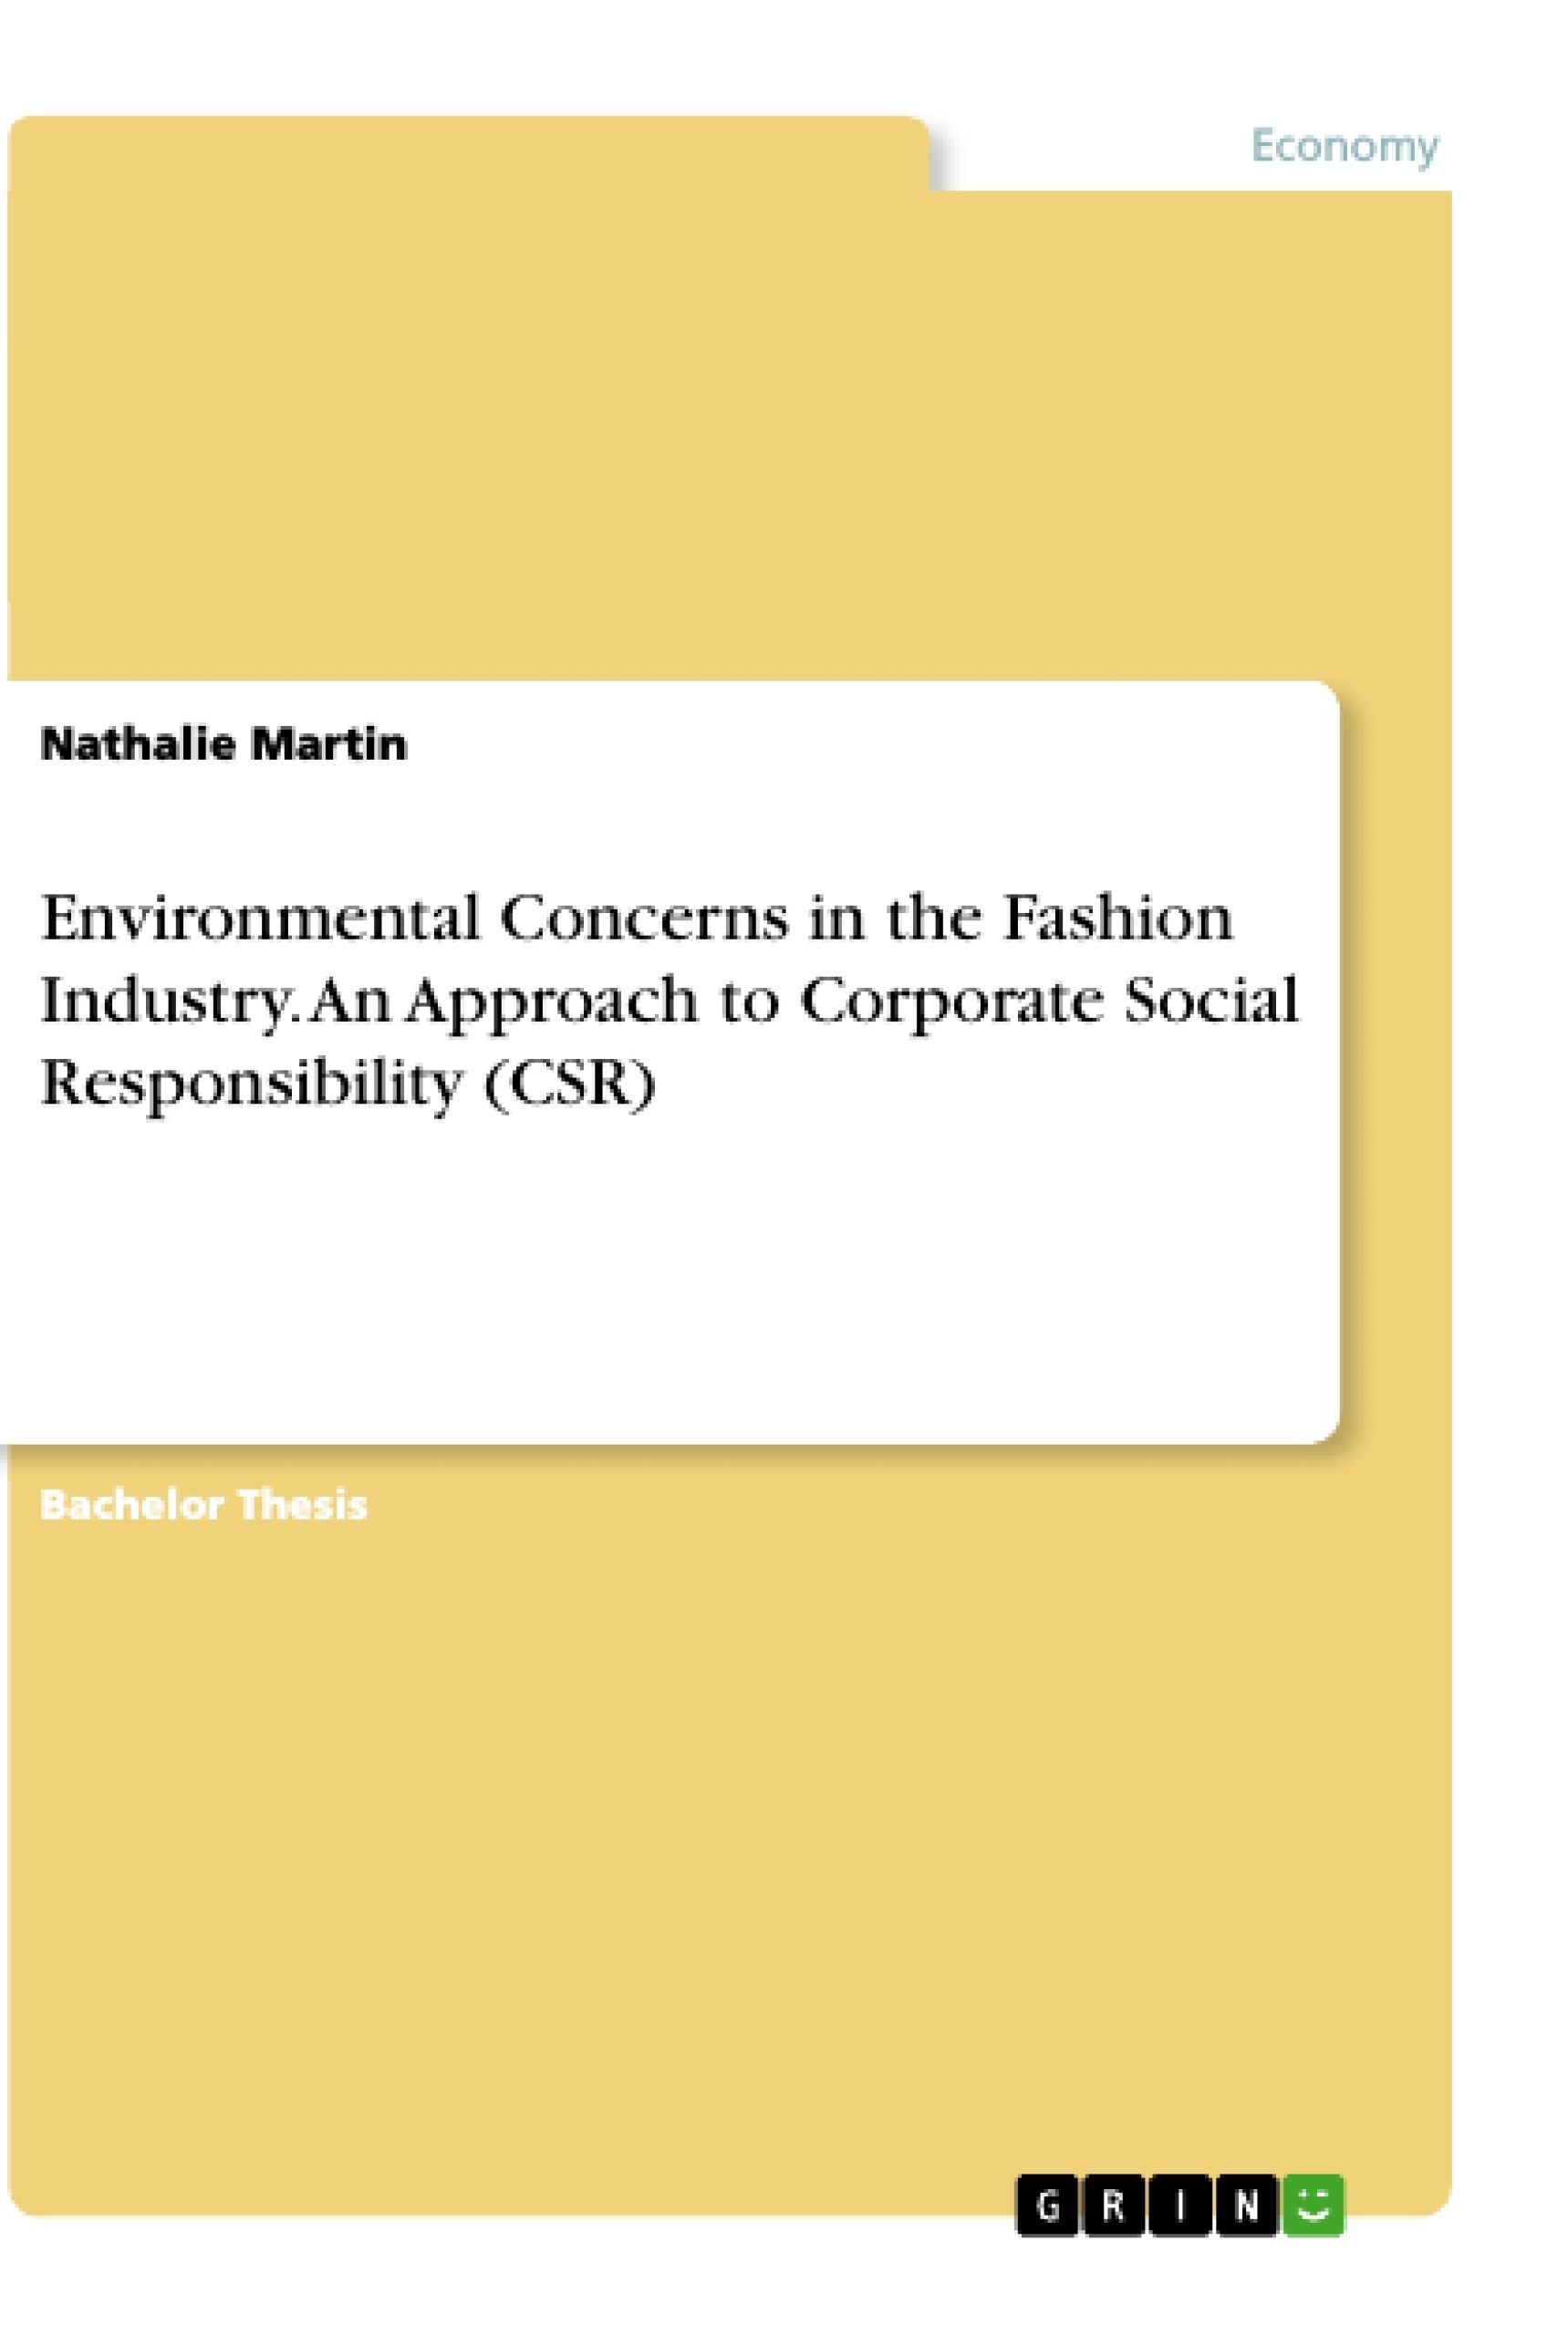 Title: Environmental Concerns in the Fashion Industry. An Approach to Corporate Social Responsibility (CSR)